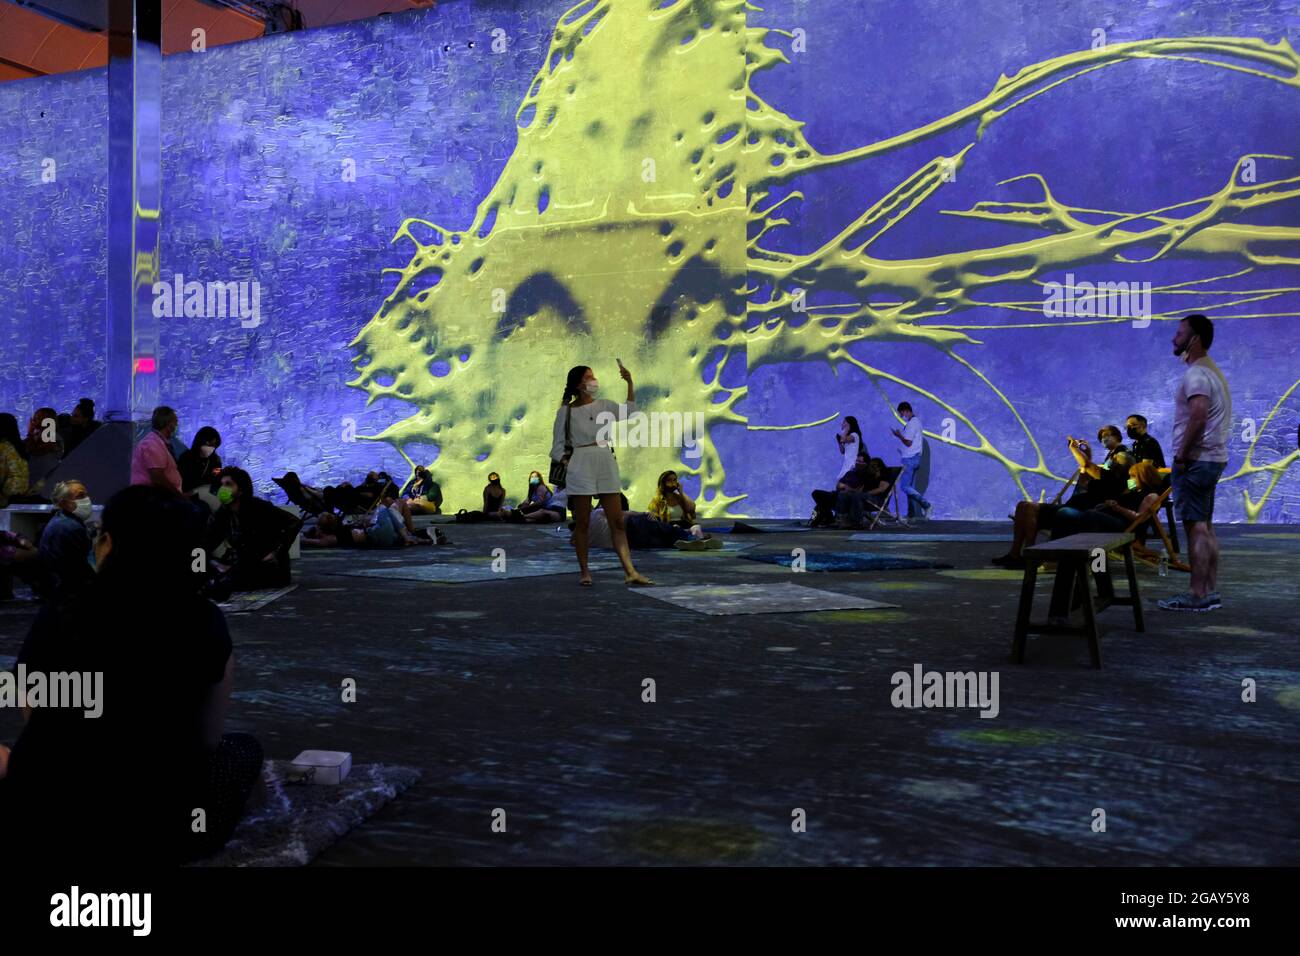 Patrons inside the Vincent Van Gogh Immersive Experience in New York City Stock Photo